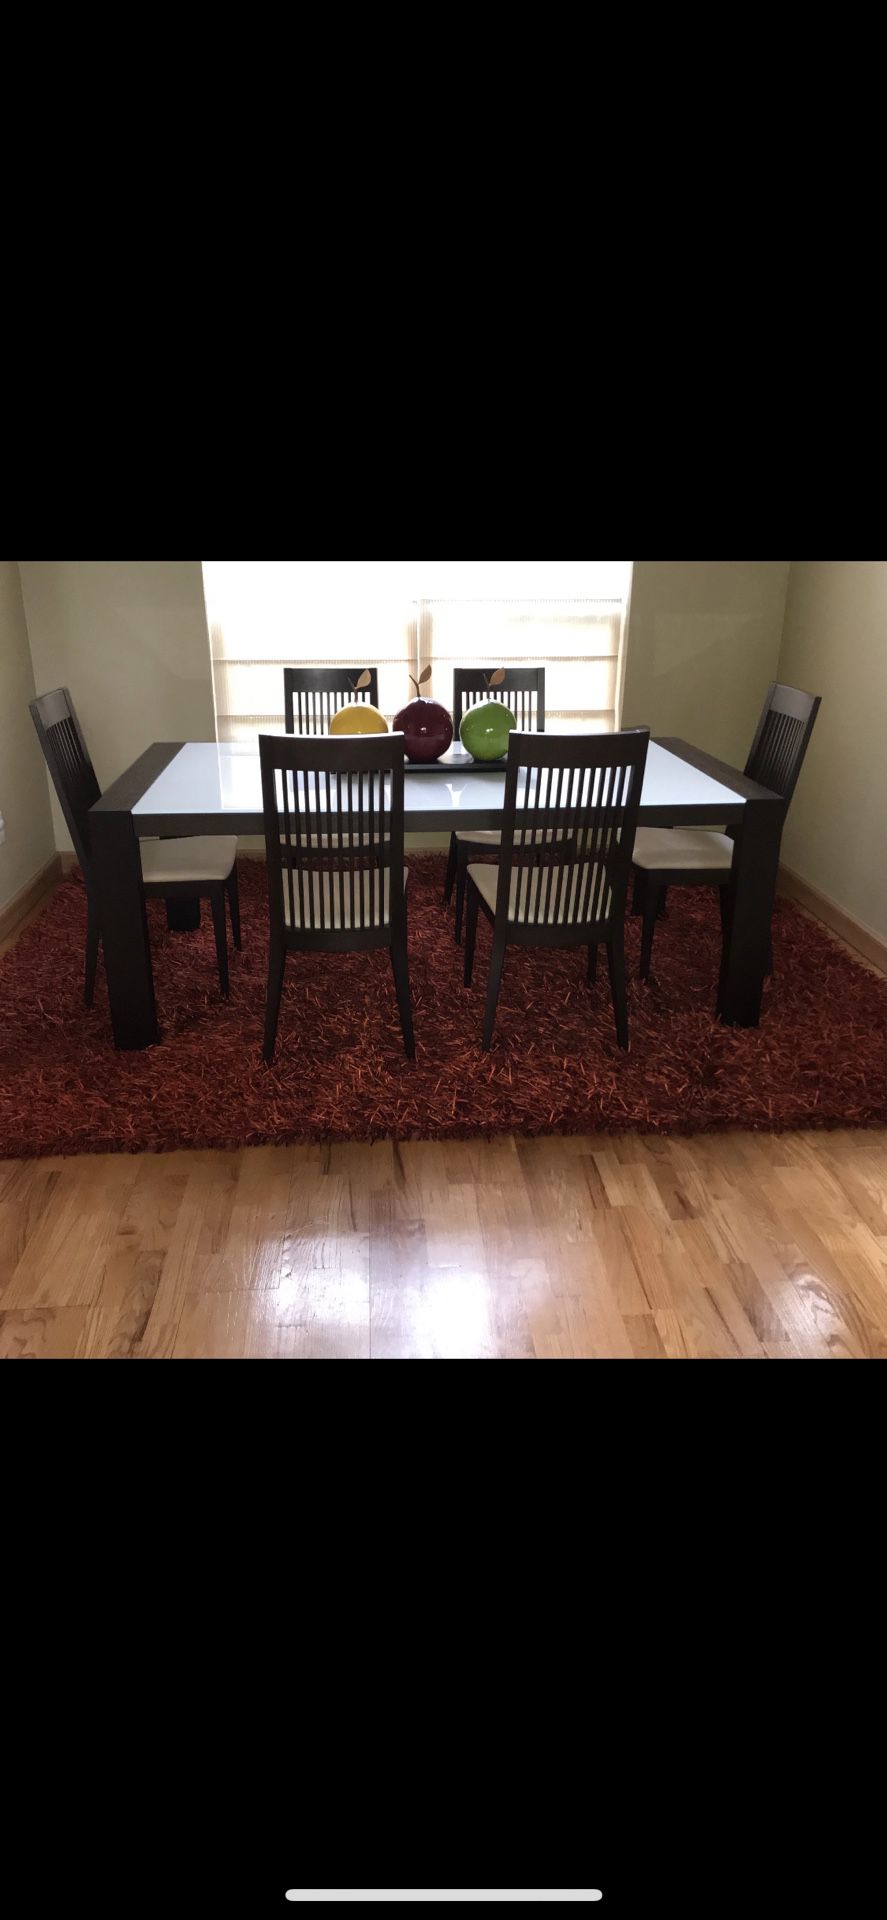 Italian Dinner Table Set (Calligari’s) W/ Slat Back chairs and authentic carpet